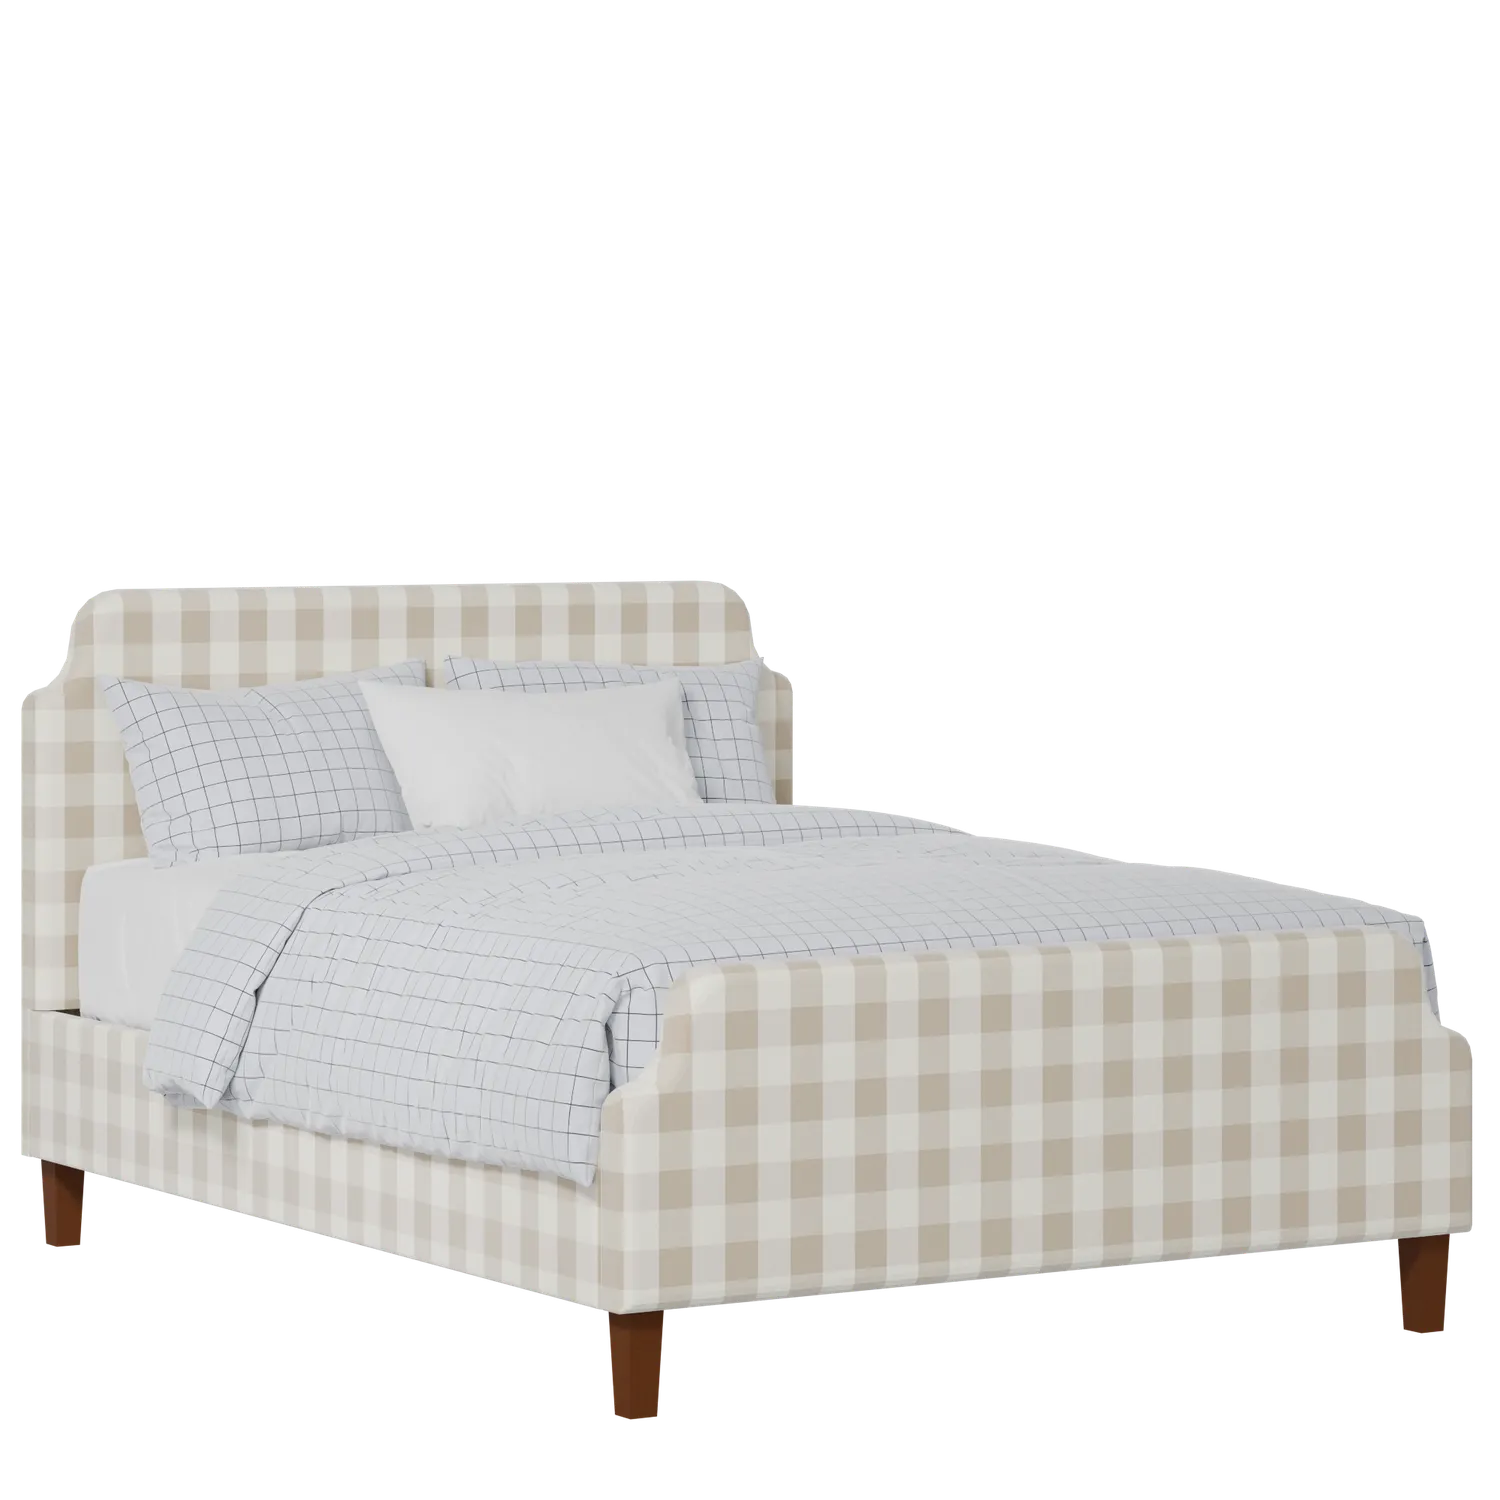 Charing upholstered bed in Romo Kemble Putty fabric with Juno mattress